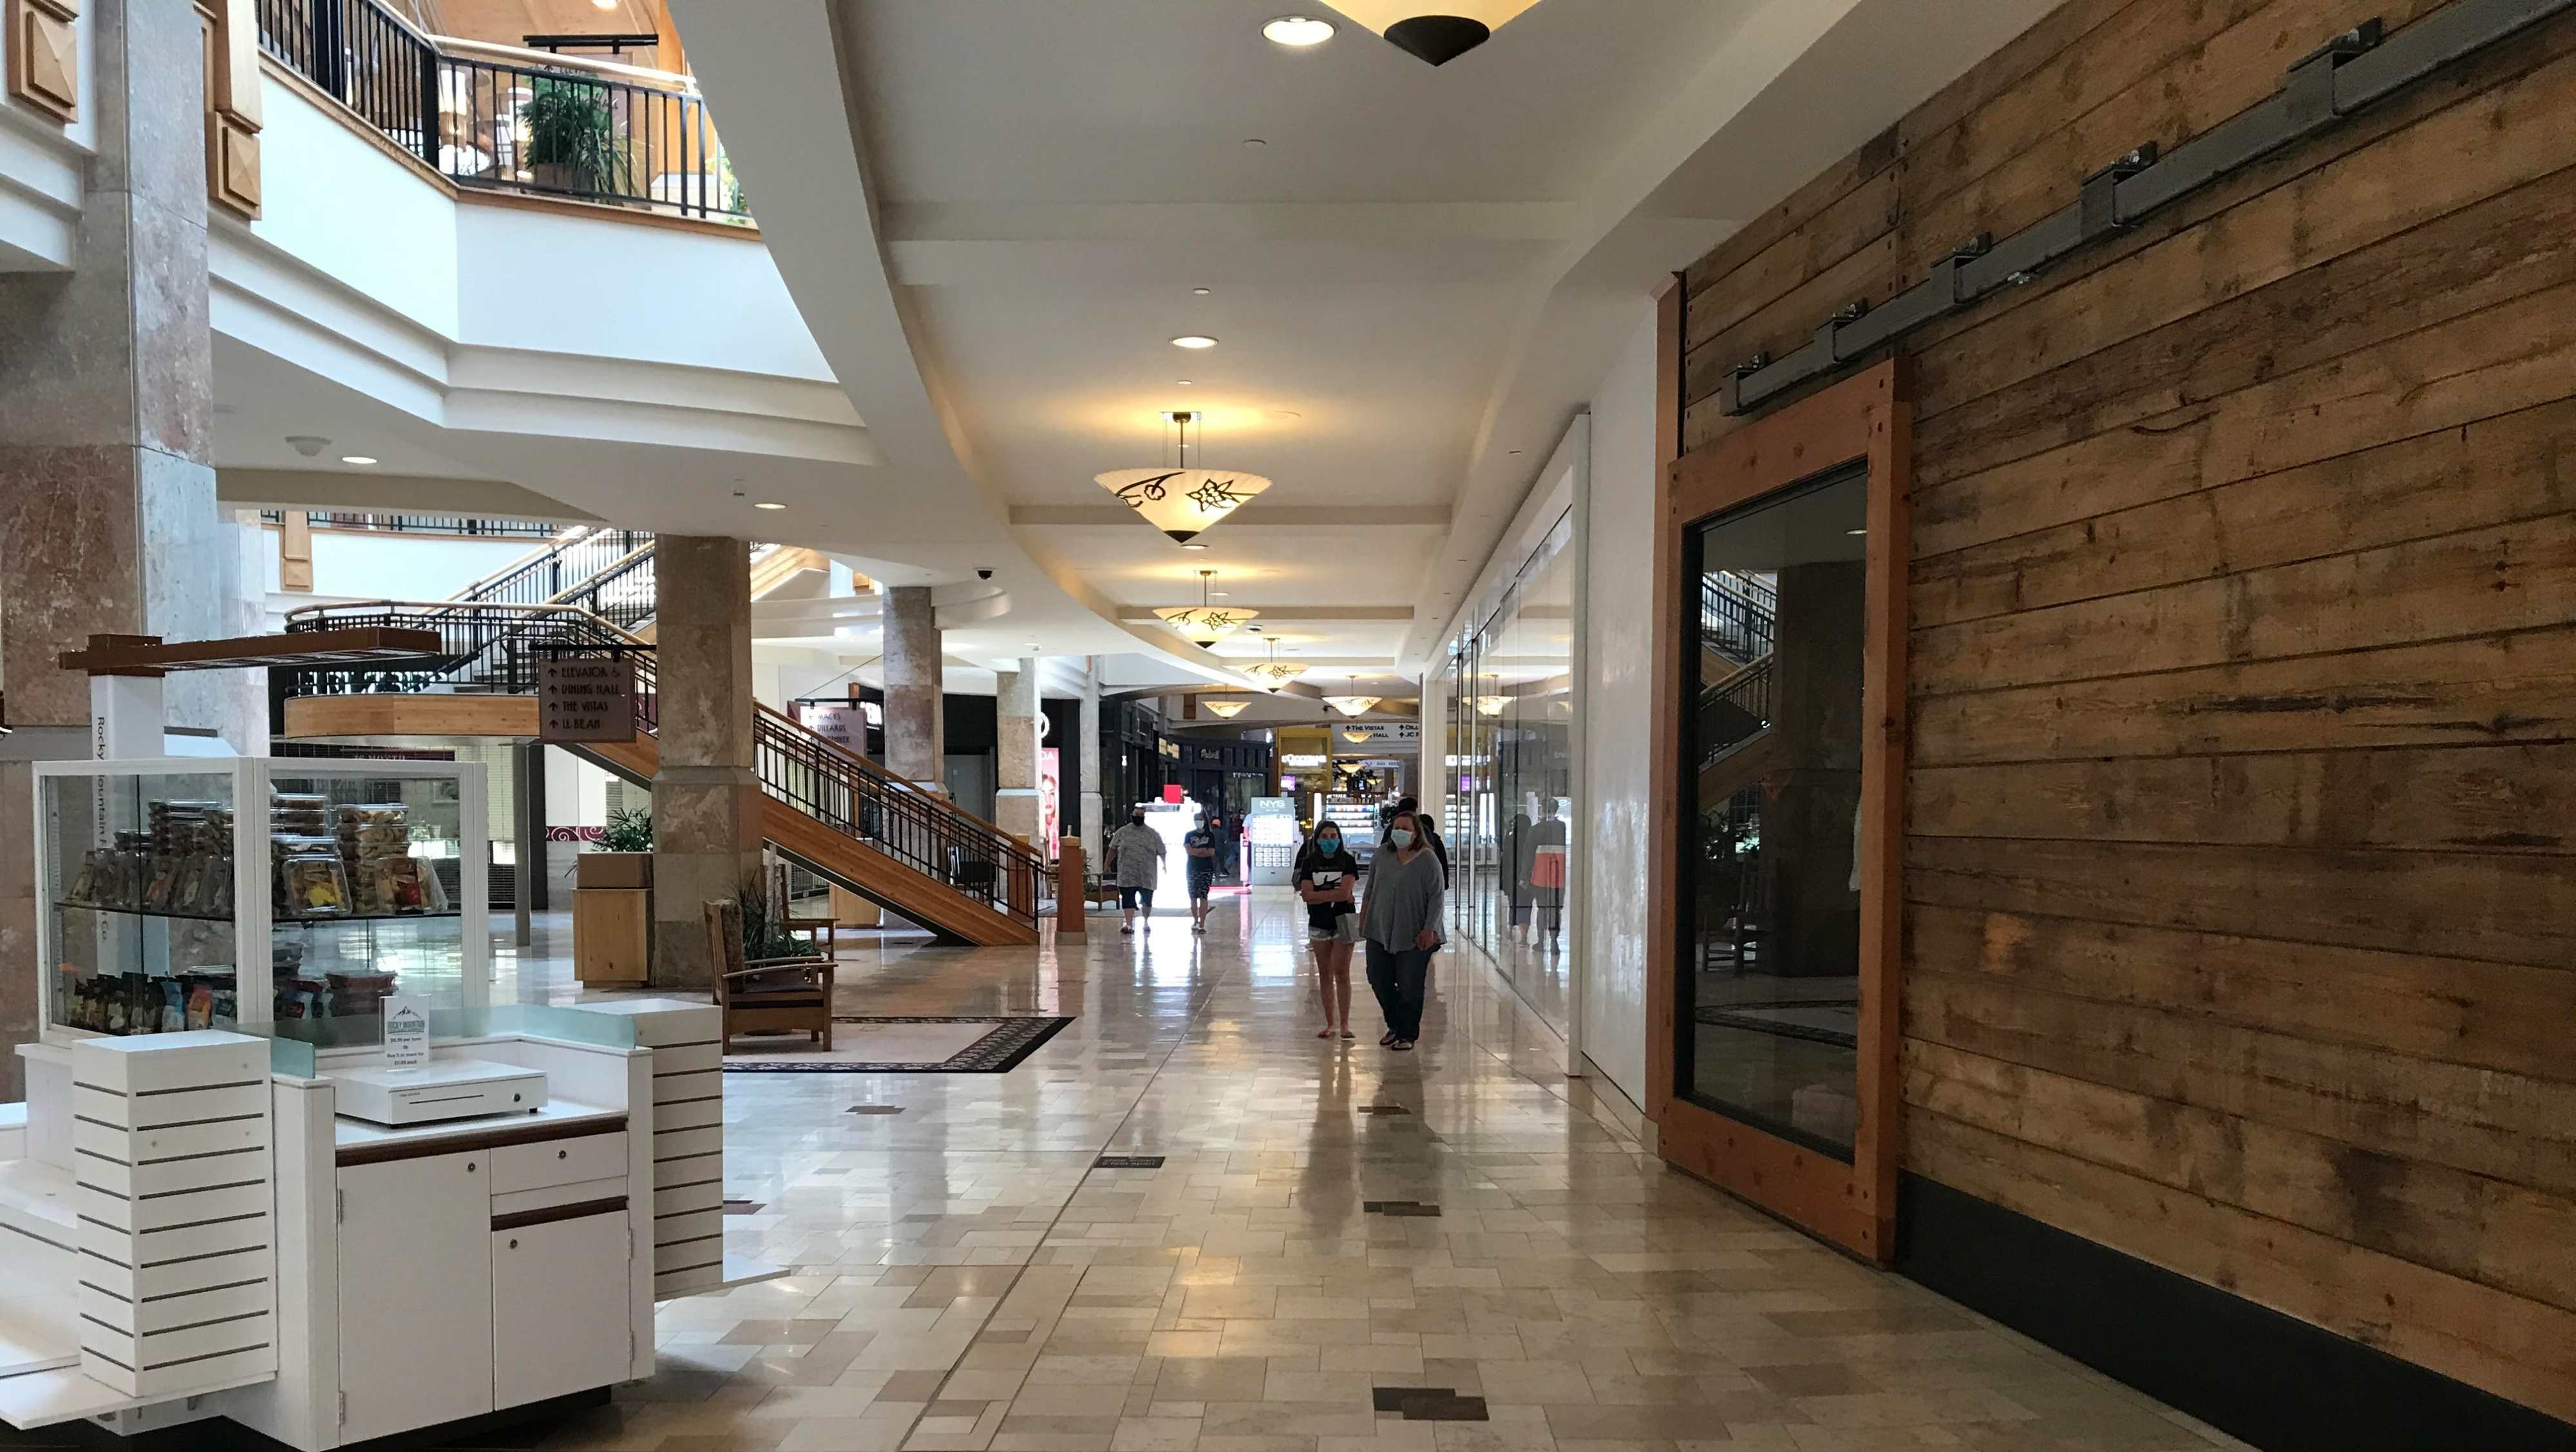 COVID-19 Update: Park Meadows Mall's Not So Grand Reopening